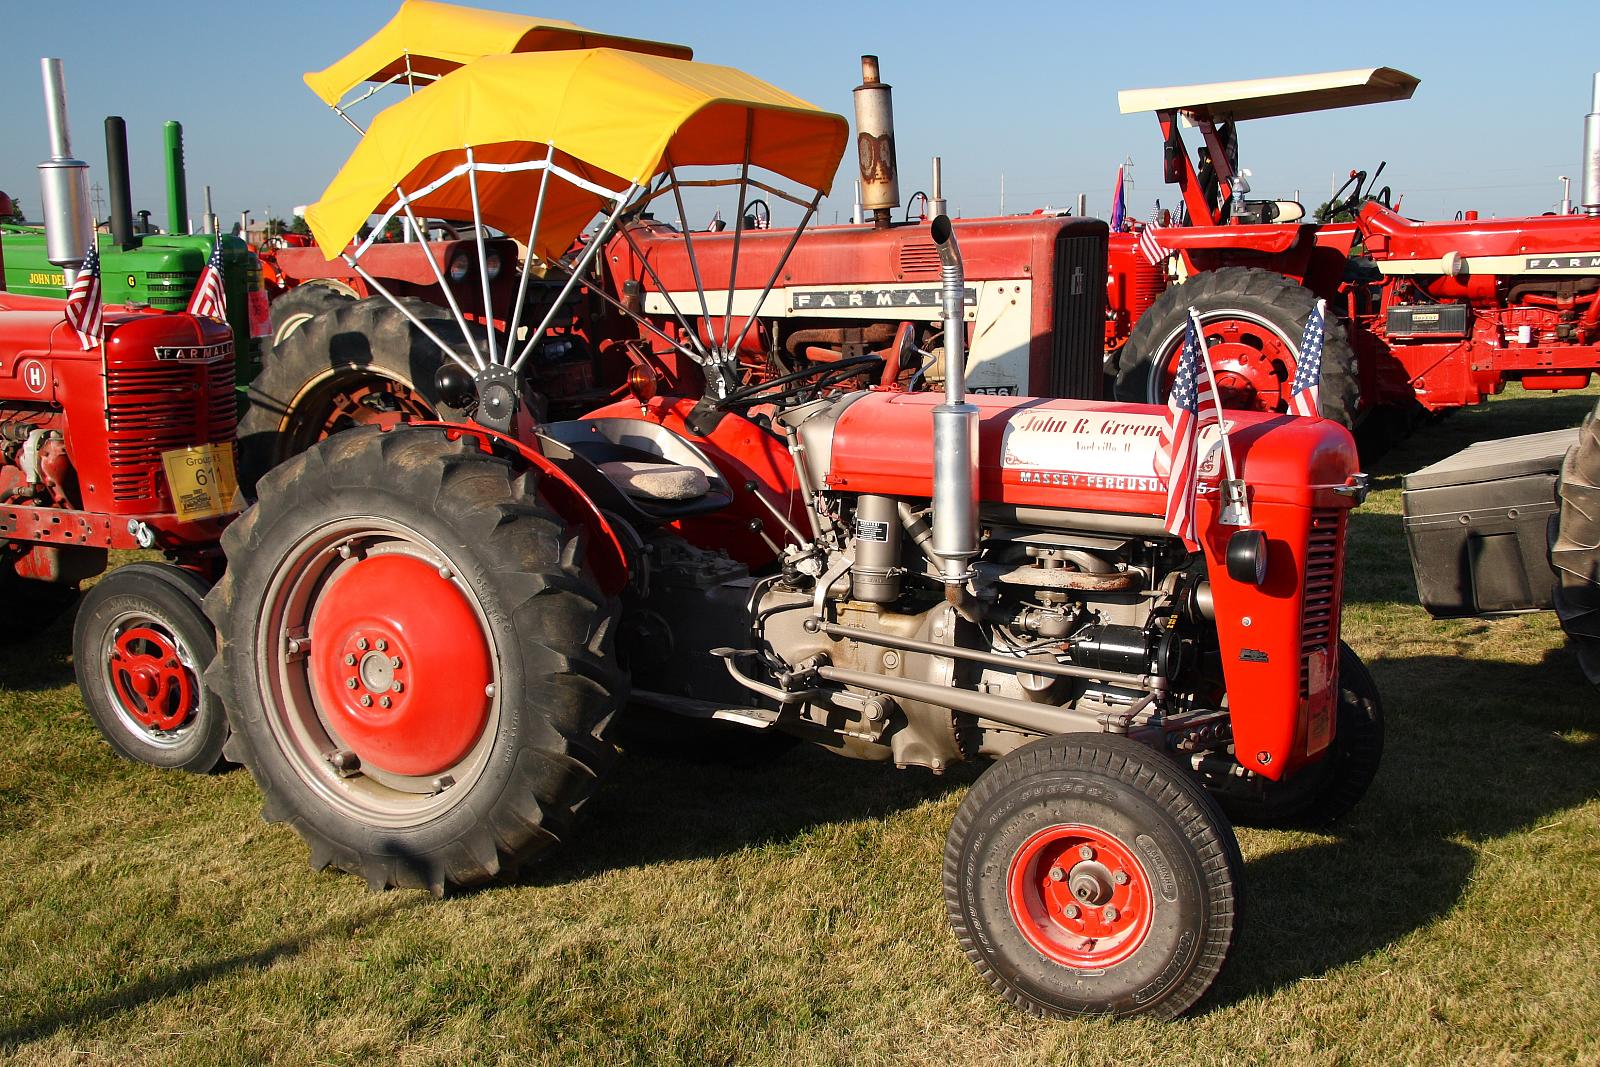 several farm tractors on display on some grass